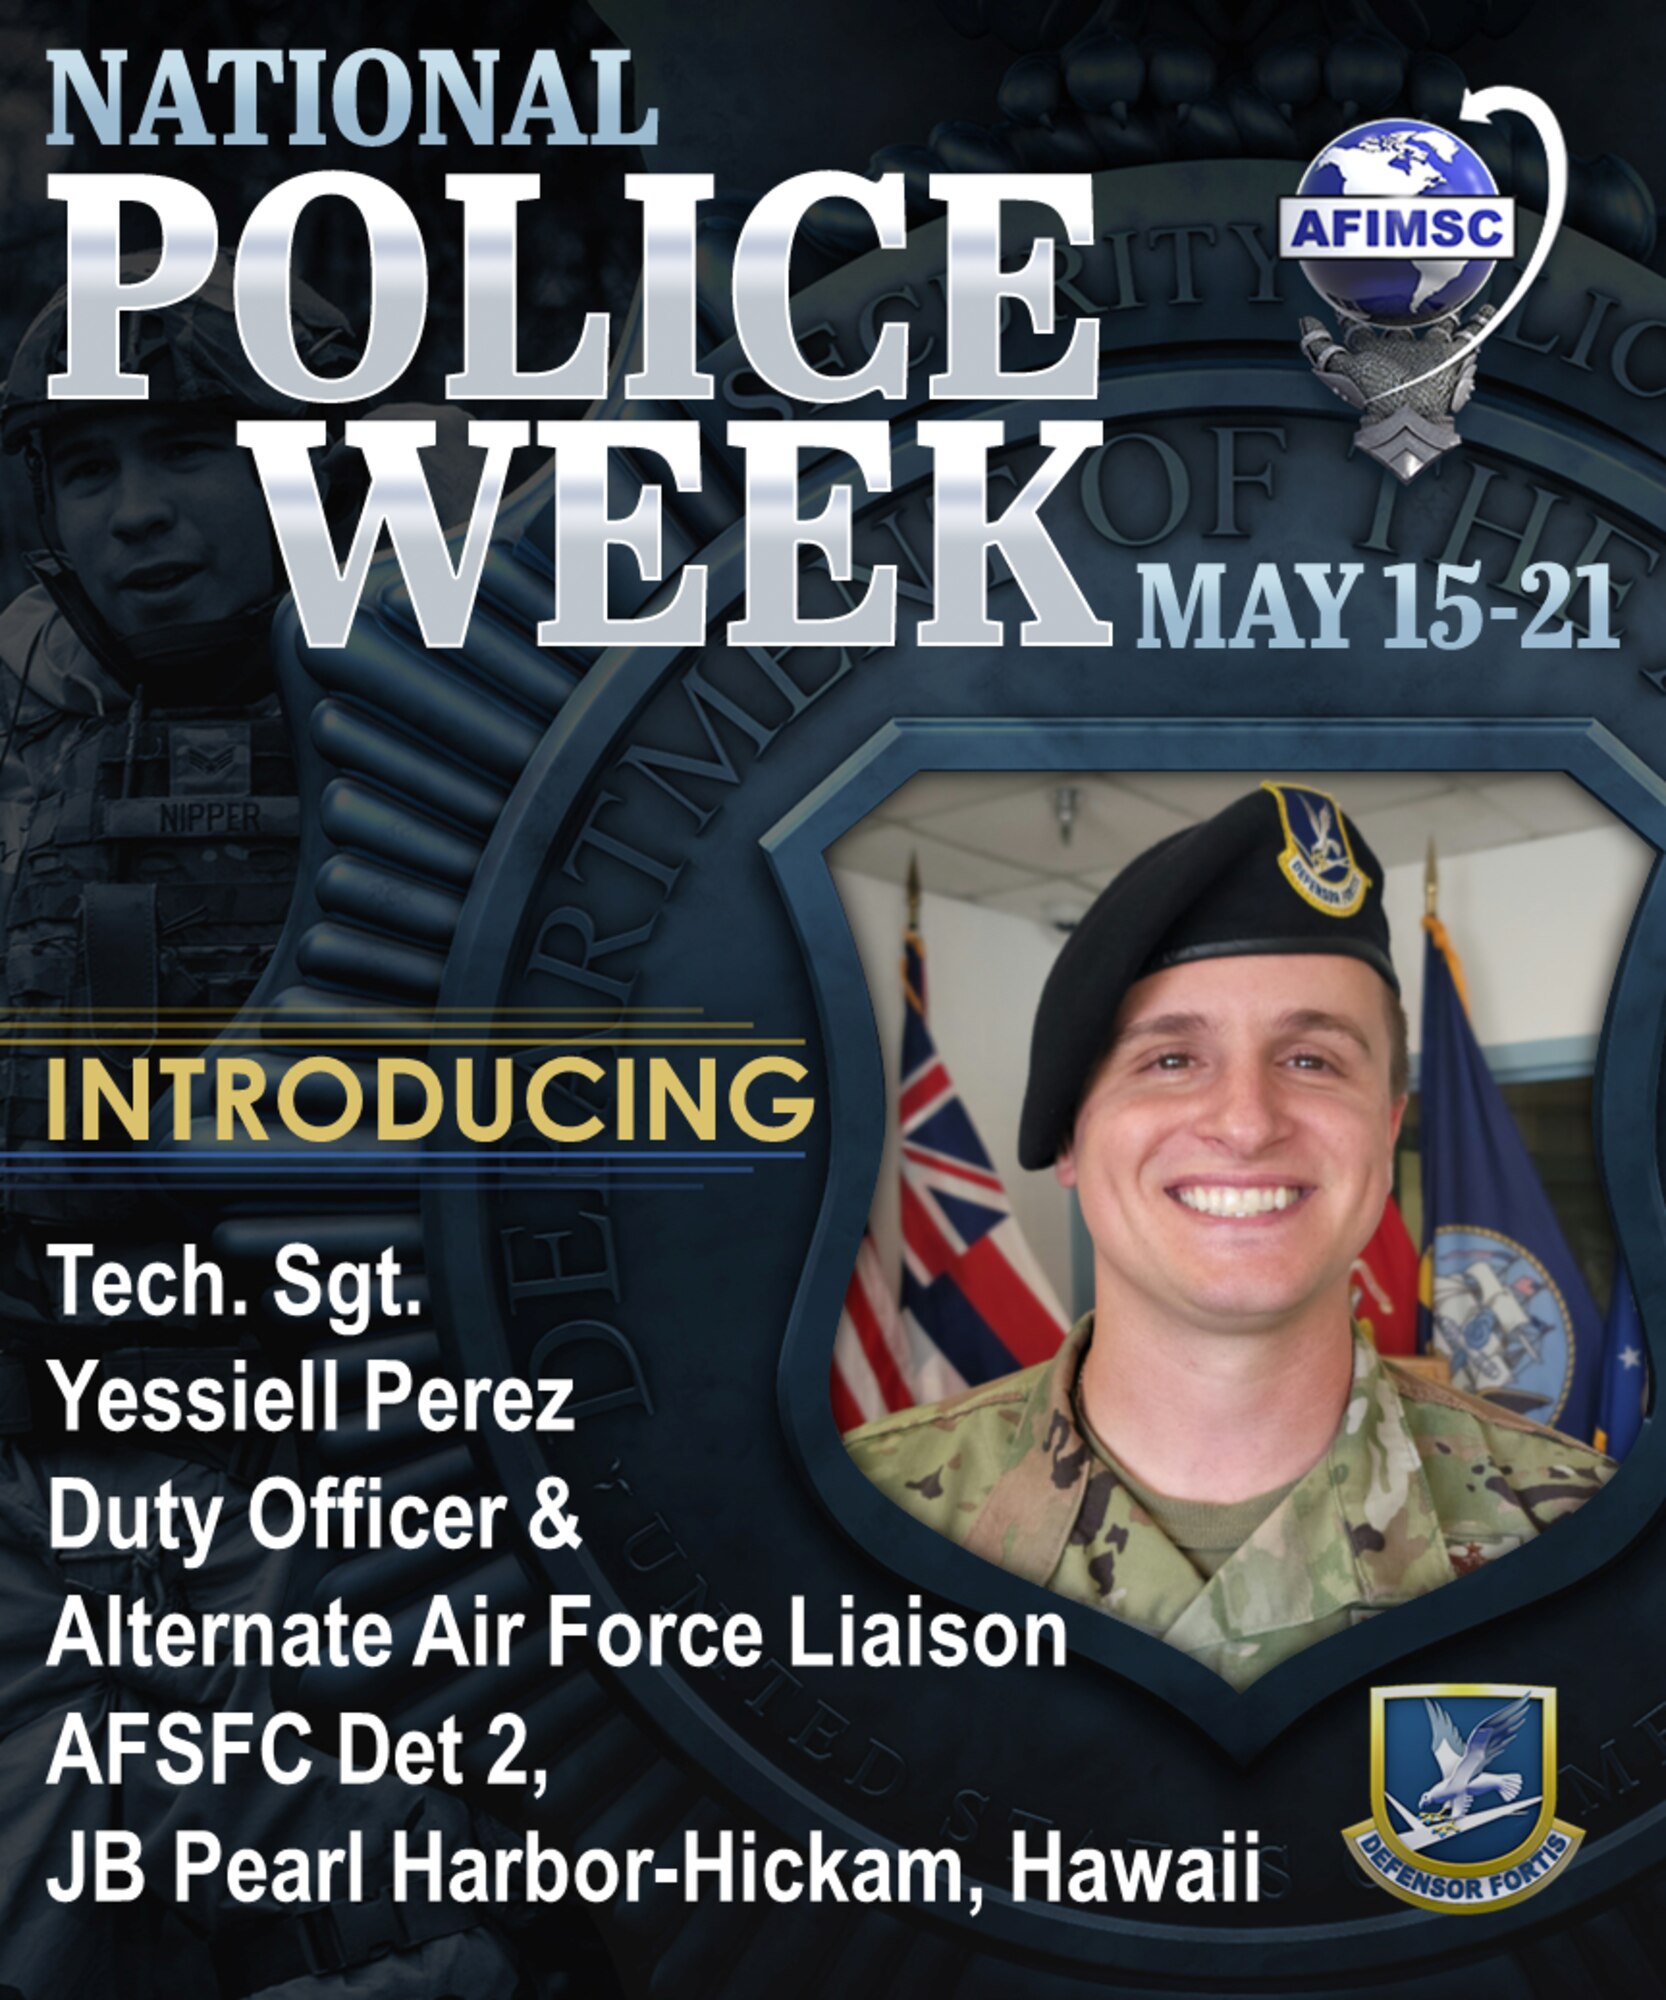 Center > National Week: Perez Installation Air Yessiell Article Force Sgt. & Mission Police News Tech. Meet > Support